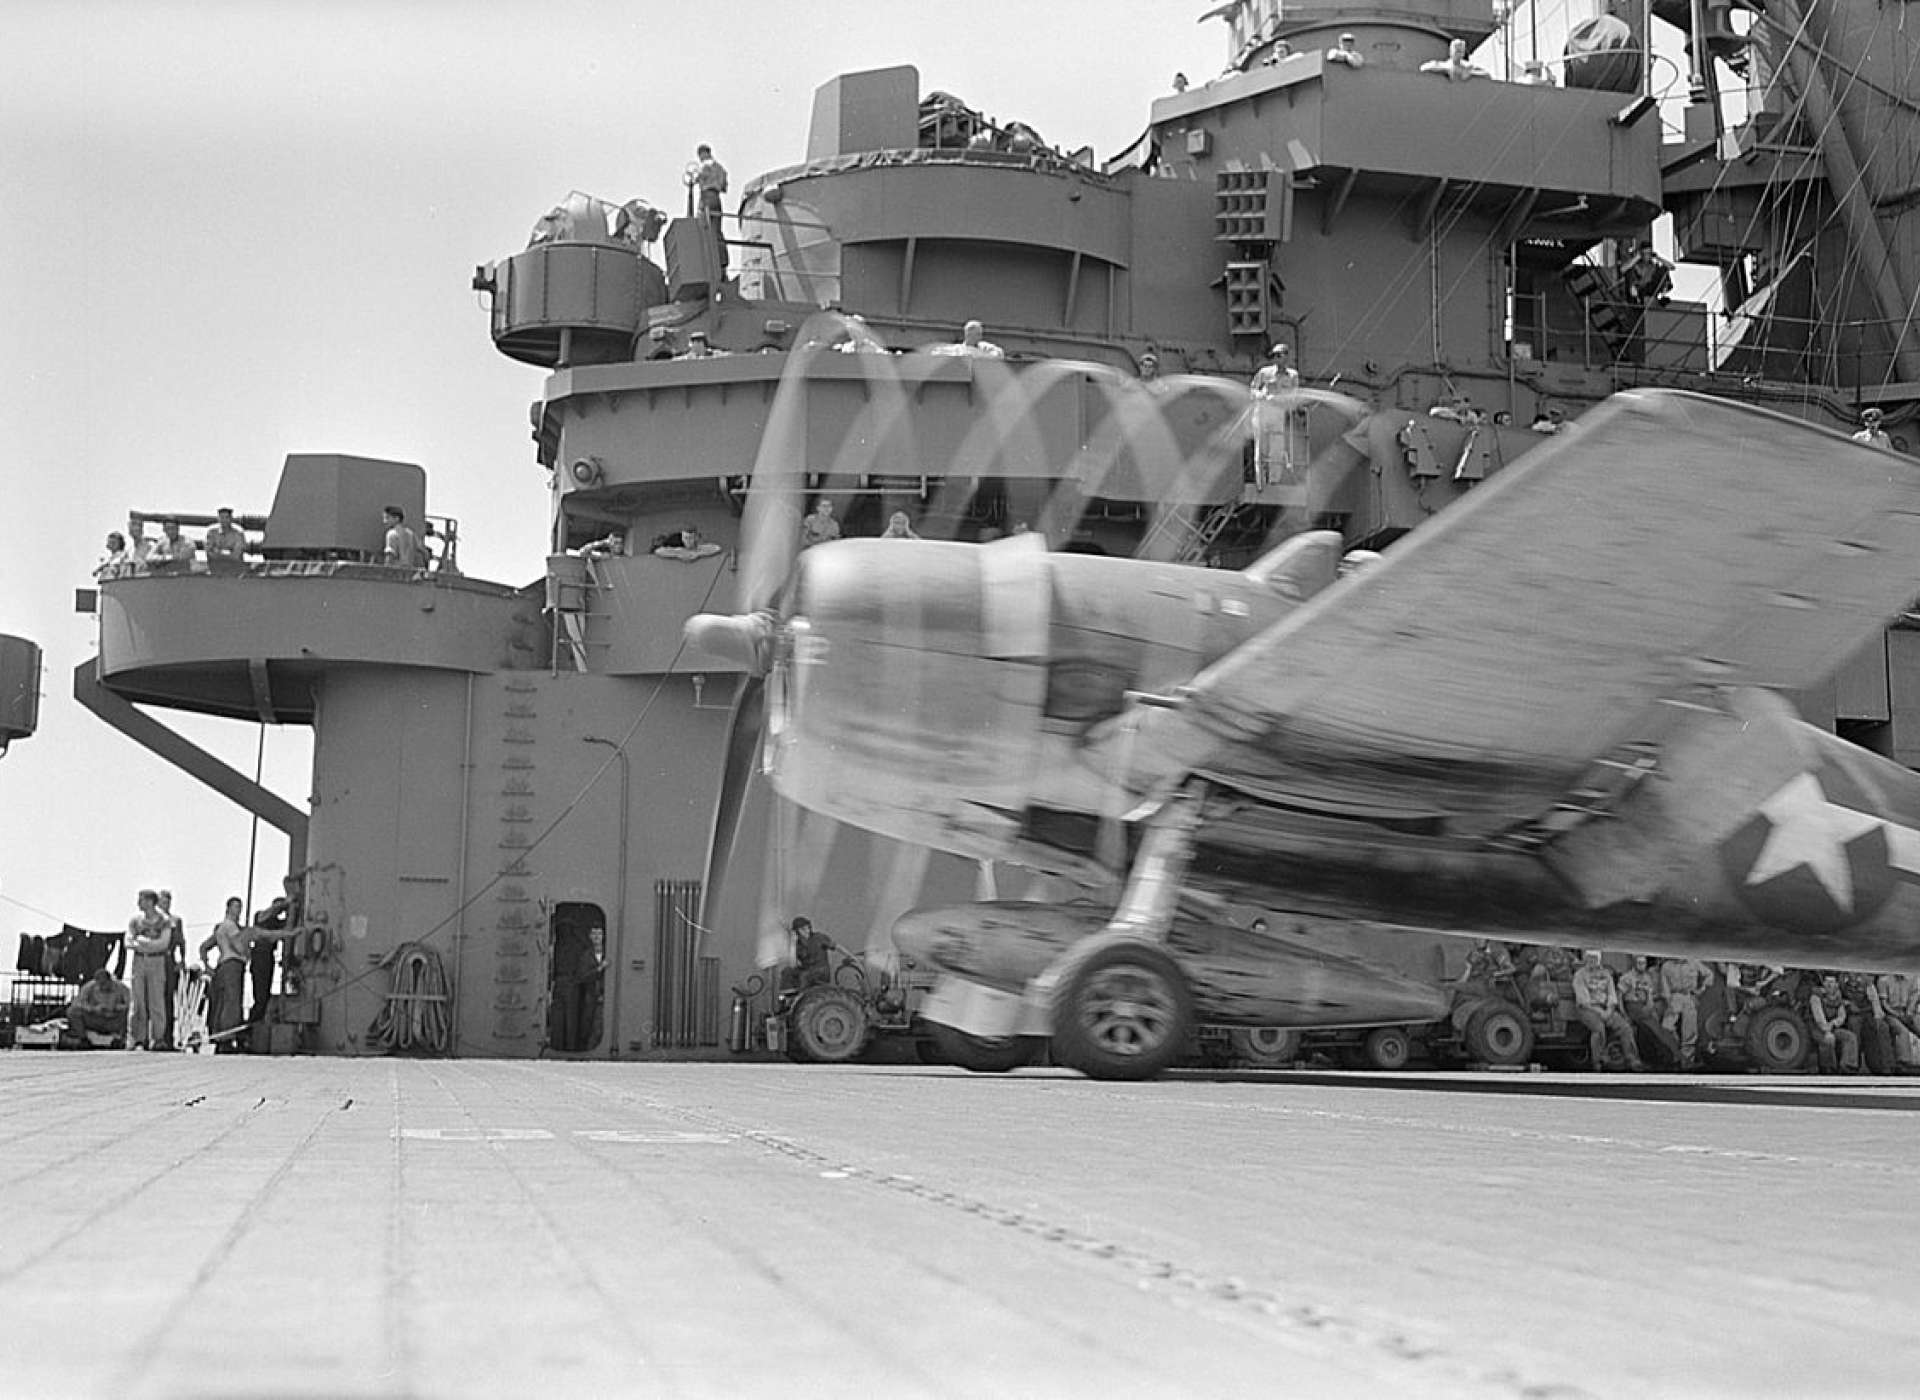 Airplane takes off from the deck of an aircraft carrier during WWII